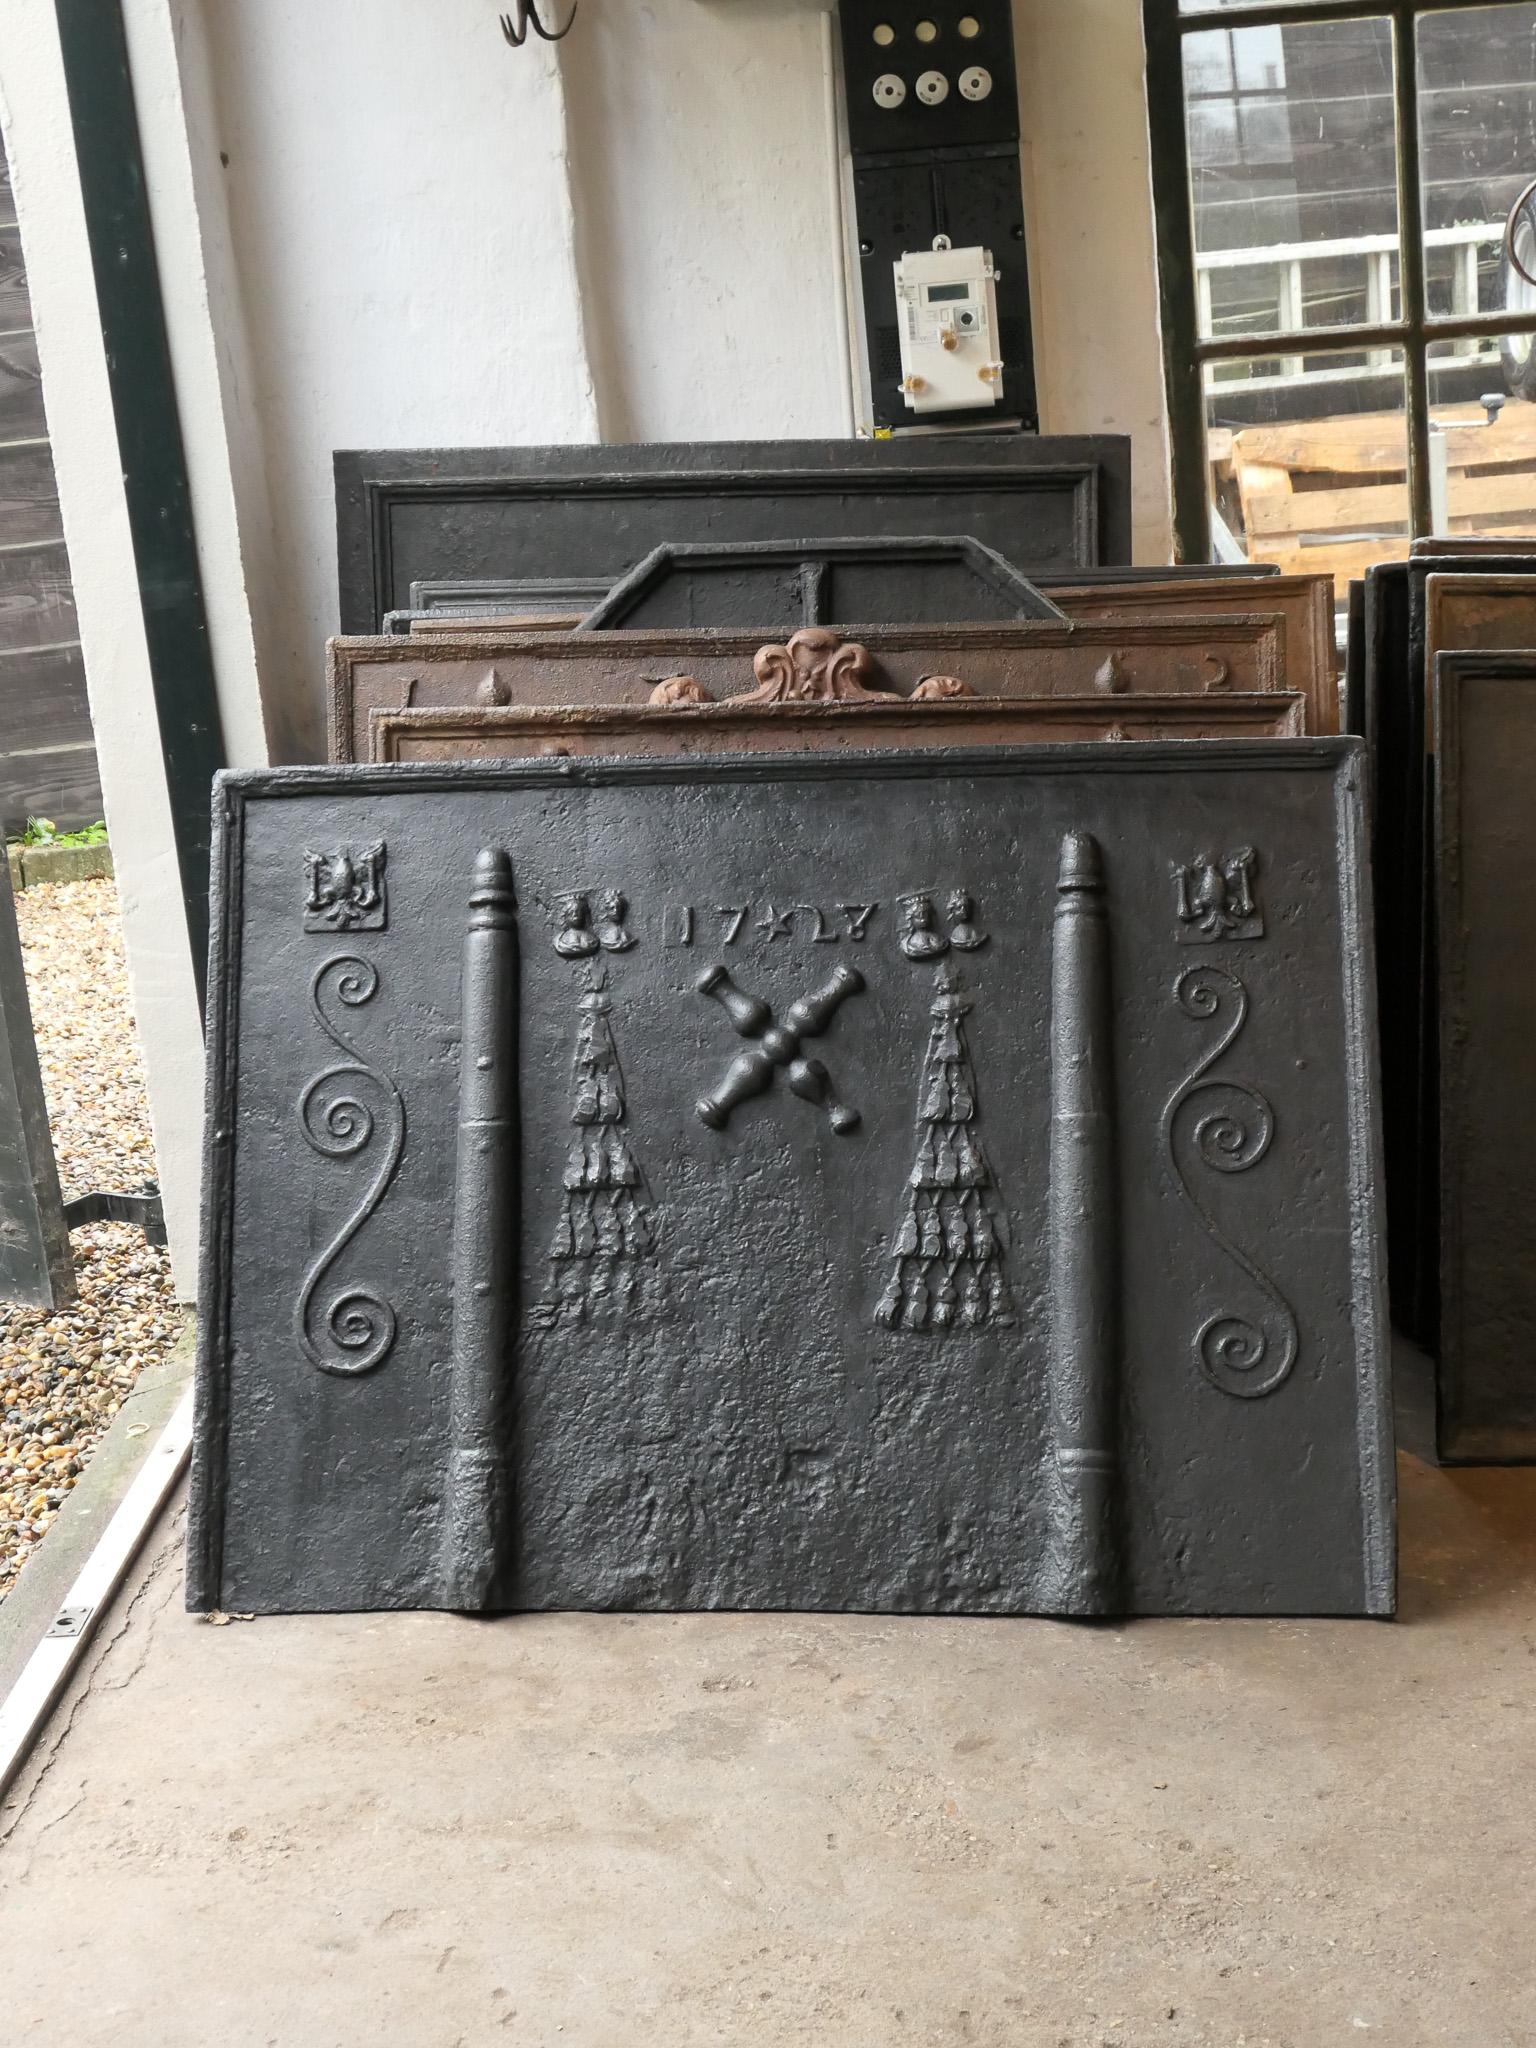 Beautiful 18th century French Louis XIV period fireback with a coat of arms. The fireback is decorated with two pillars and a Saint Andrew's Cross in the center.

The fireback is made of cast iron and has a black / pewter patina. It is in a good